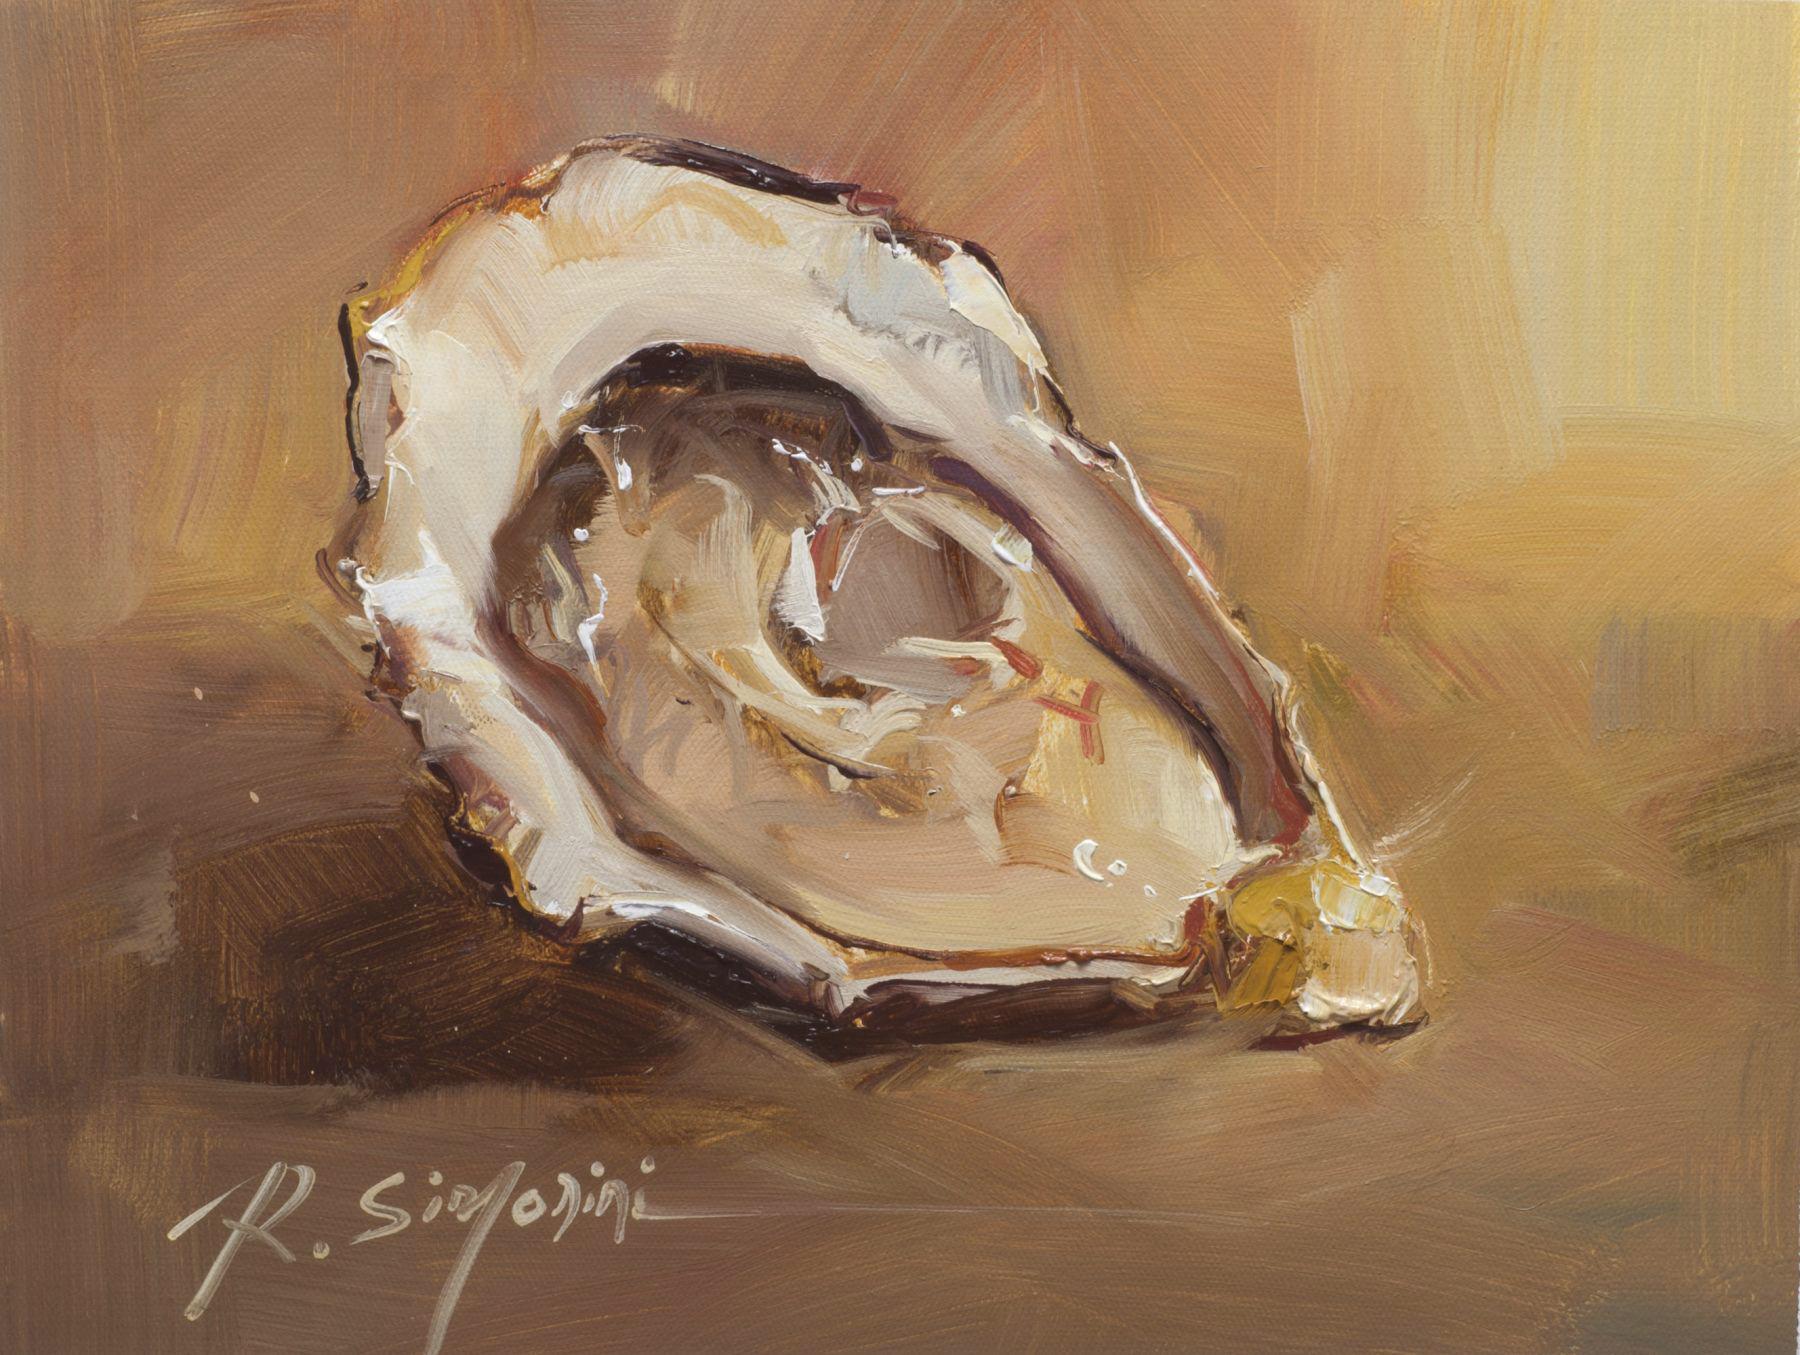 This painting by artist Ray Simonini titled "Oyster of the world" is a 12x16 nautical oil painting on canvas featuring a close-up of an oyster shell against a vibrant orange and yellow background.

About the artist:
Simonini was born in China in